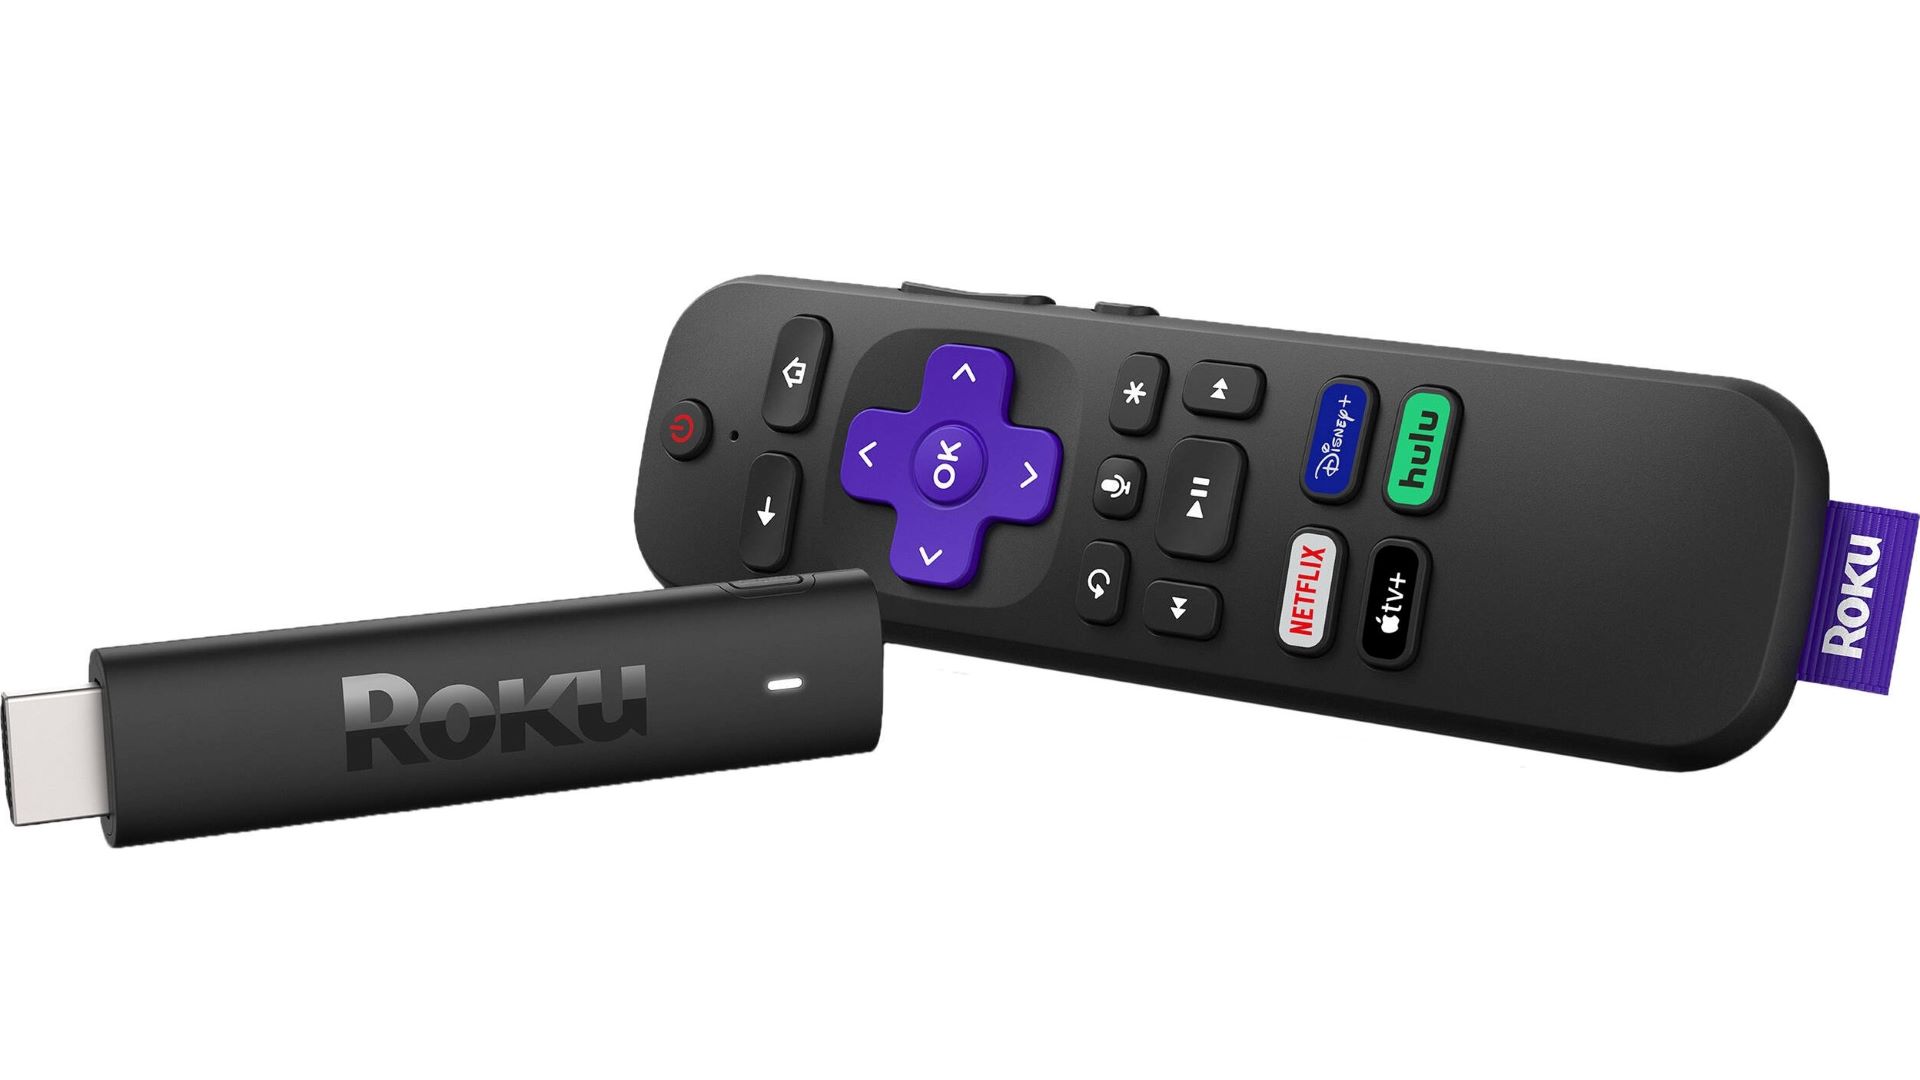 Roku Streaming Stick 4K with remote control